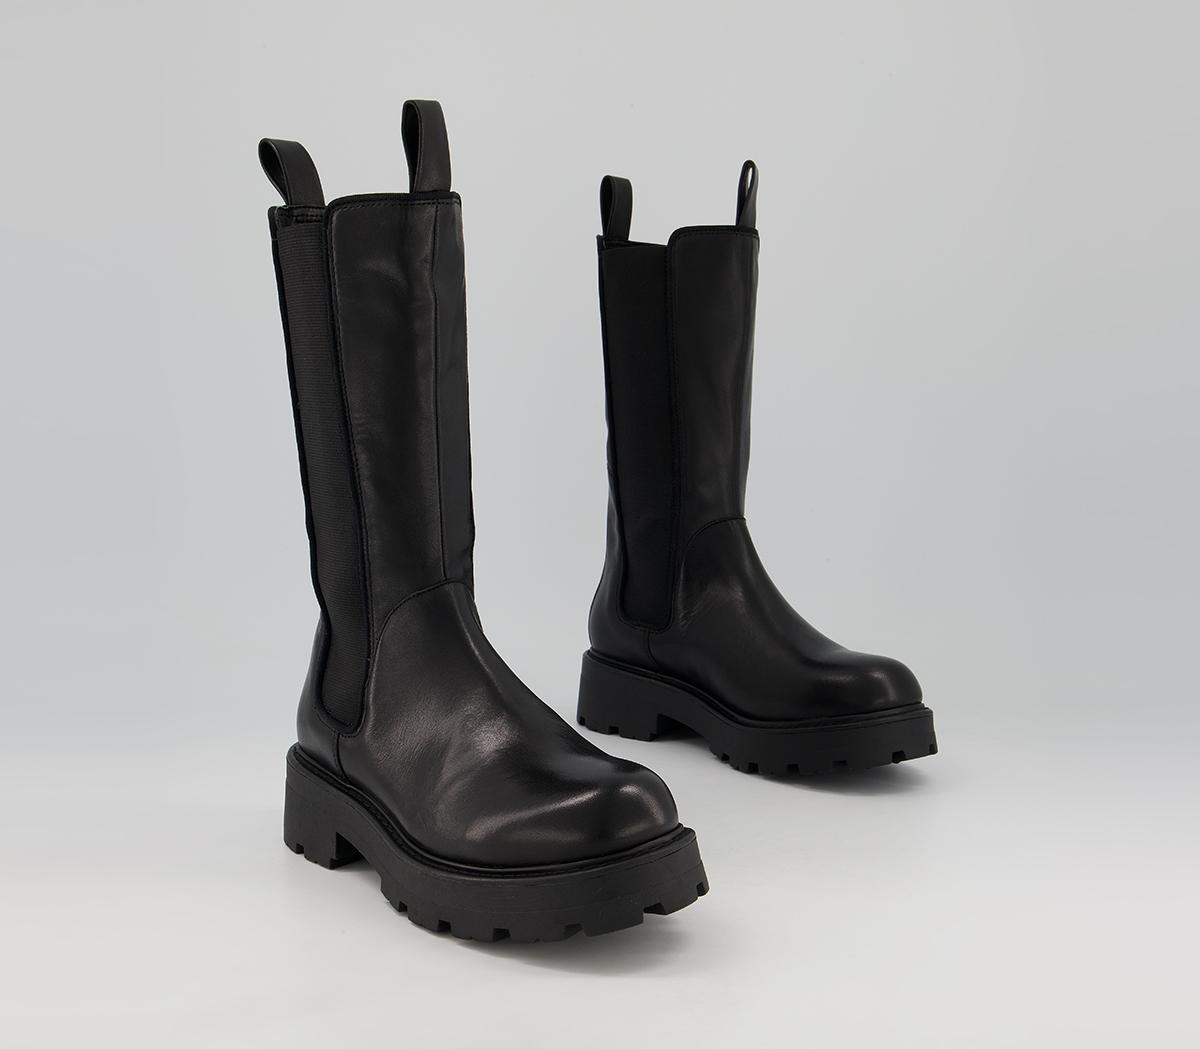 Vagabond Shoemakers Cosmo 2.0 Tall Boots Black - Knee High Boots